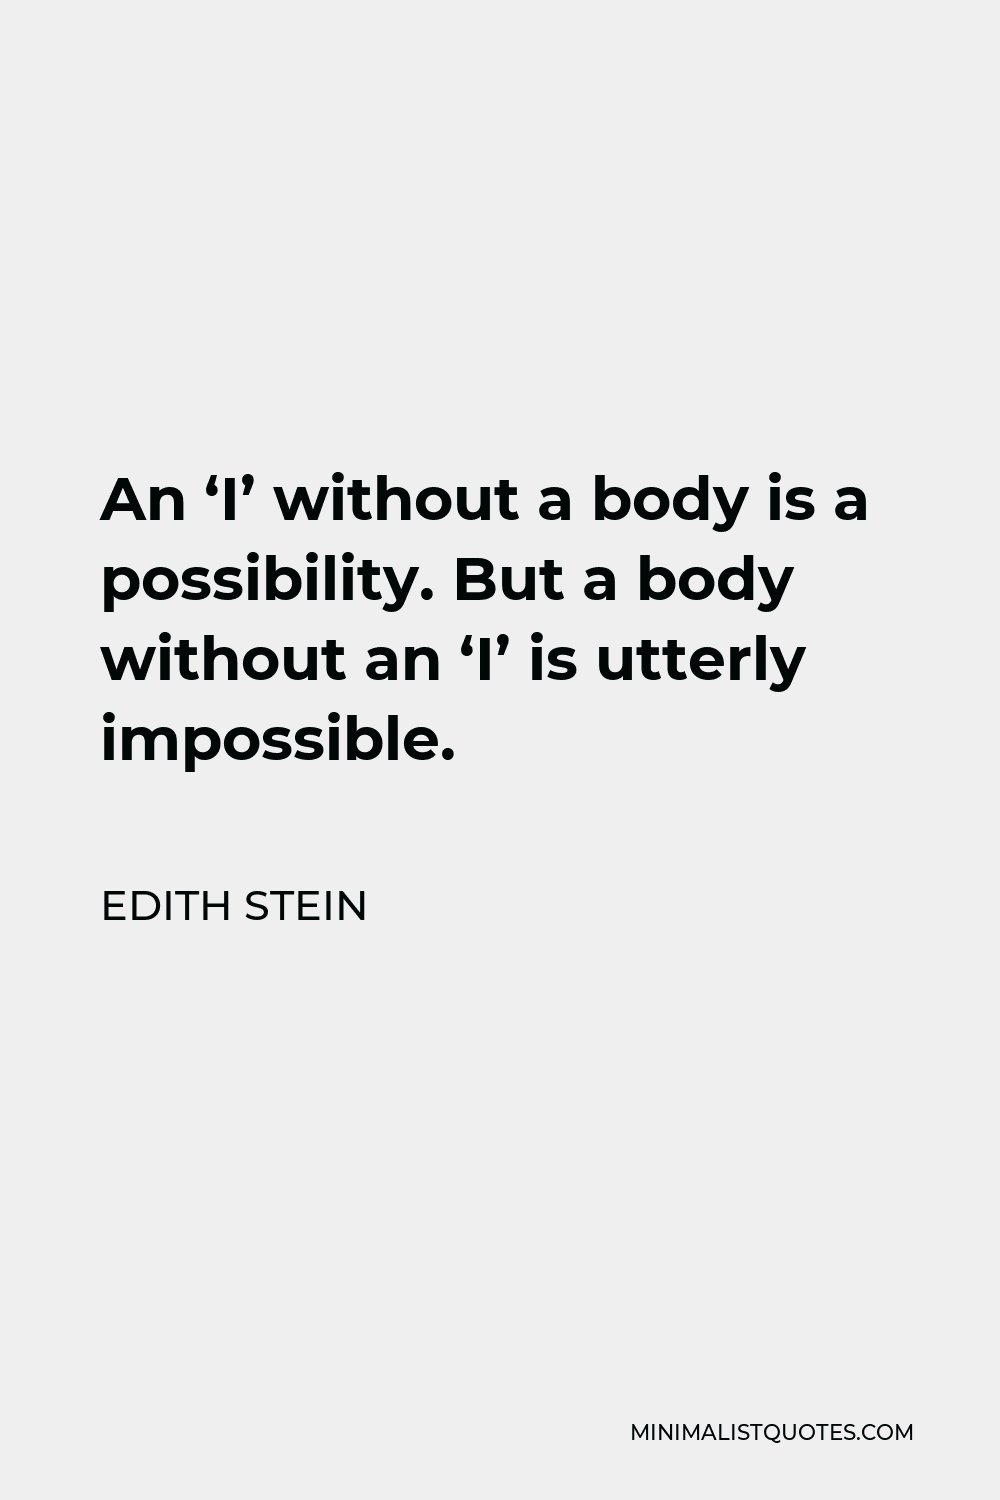 Edith Stein Quote - An ‘I’ without a body is a possibility. But a body without an ‘I’ is utterly impossible.